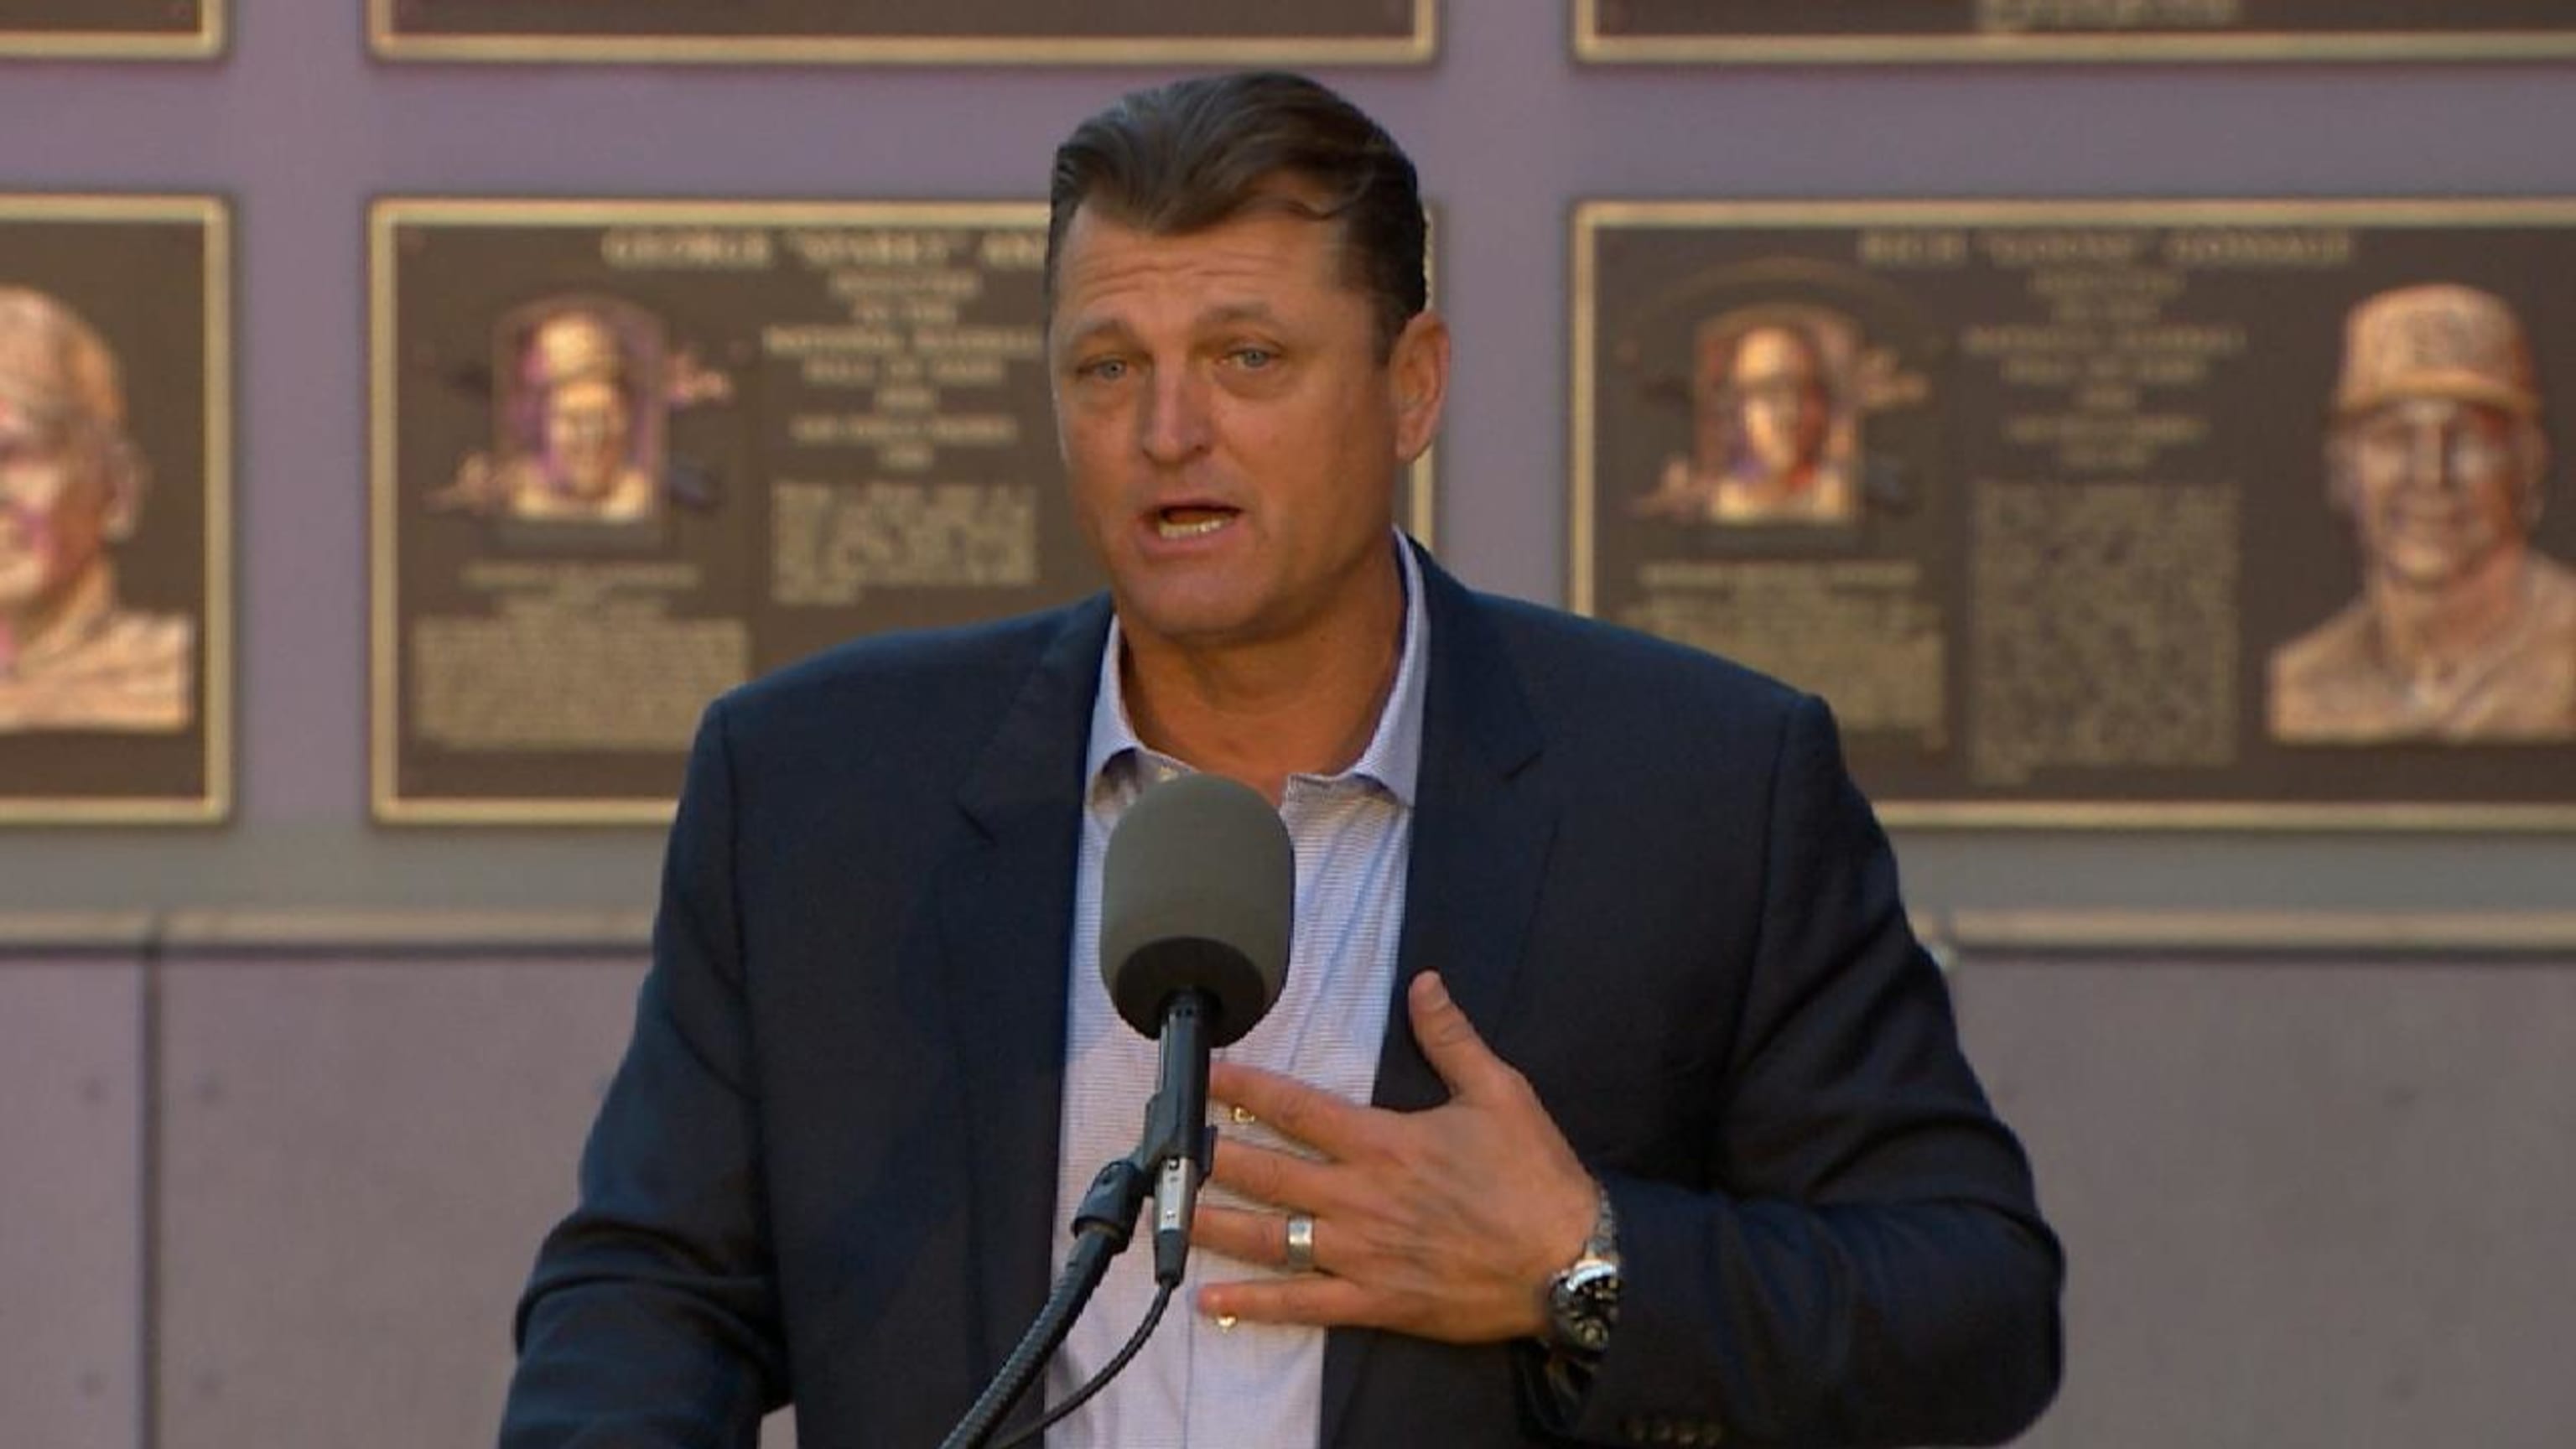 Trevor Hoffman discusses career and Hall of Fame induction on MLB Network's  High Heat - Gaslamp Ball